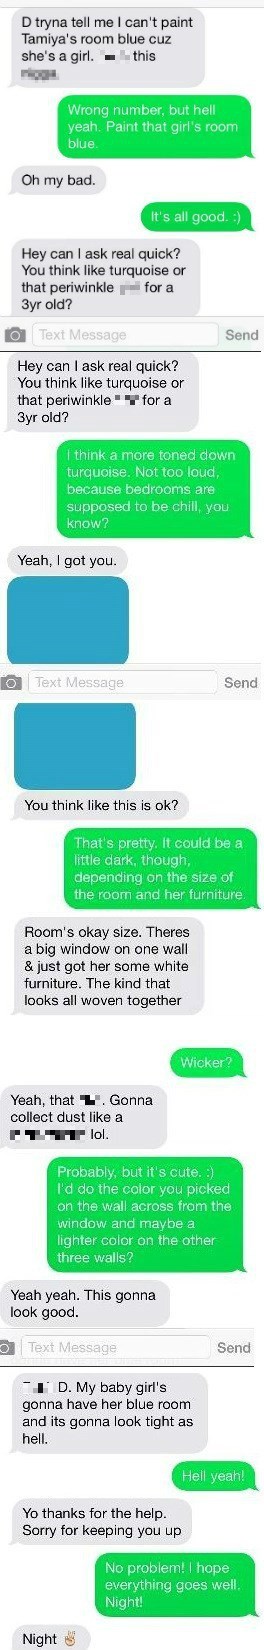 funny-texting-fails-wrong-number-decoration-advice